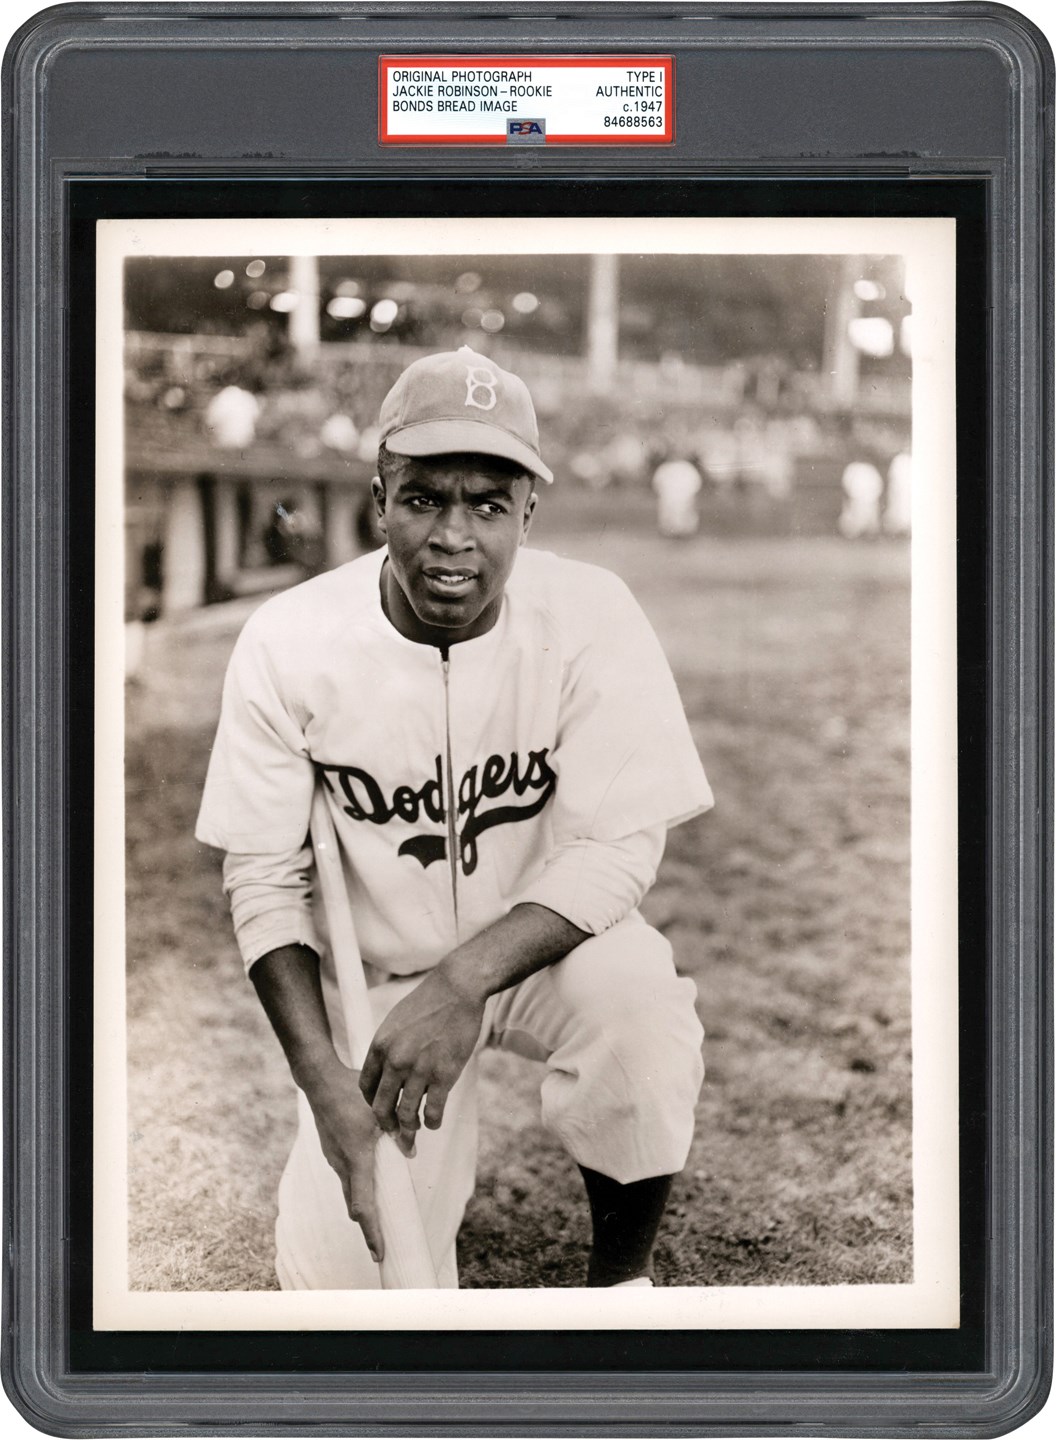 - 47 Jackie Robinson Rookie Brooklyn Dodgers Photograph Used for 1947 Bond Bread Rookie Card (PSA Type I)